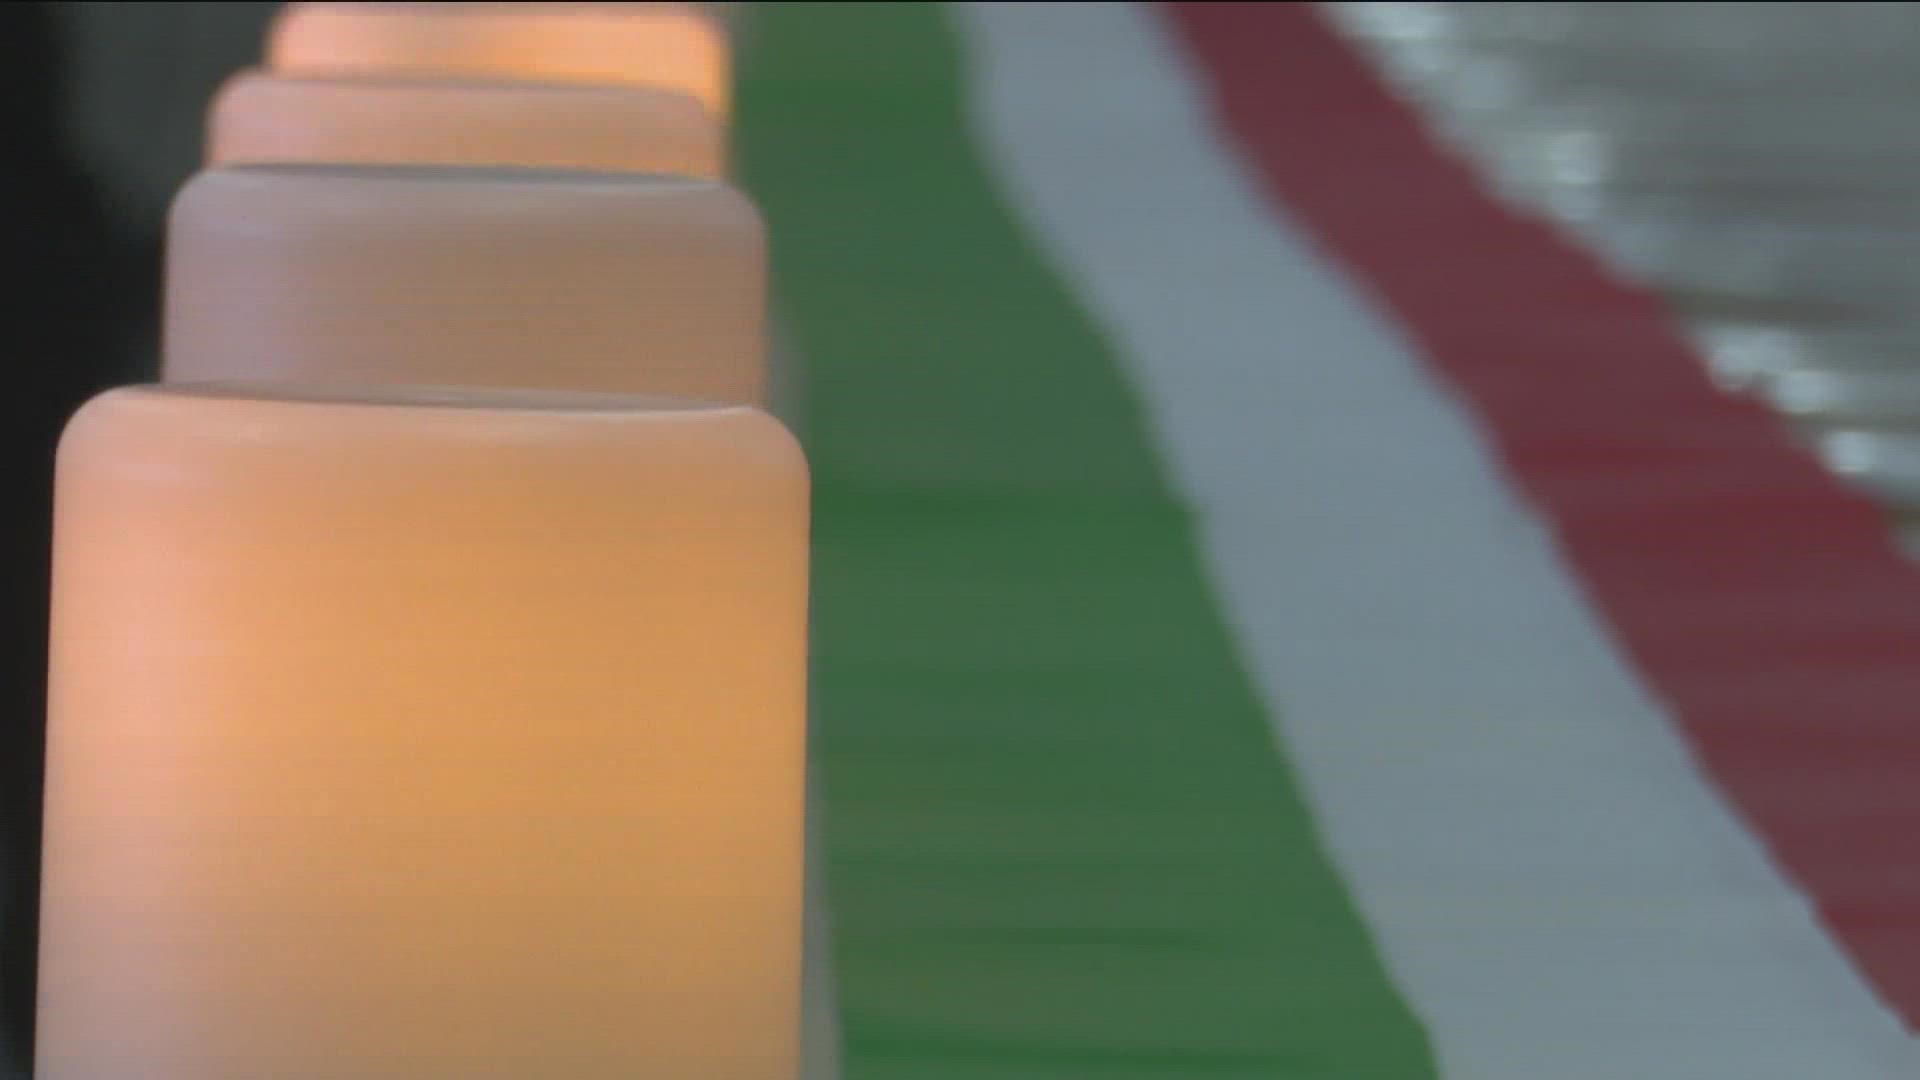 The Boise State faculty event was held to raise awareness for recent protests in Iran, which were sparked by the death of 22-year-old Mahsa Amini in September.